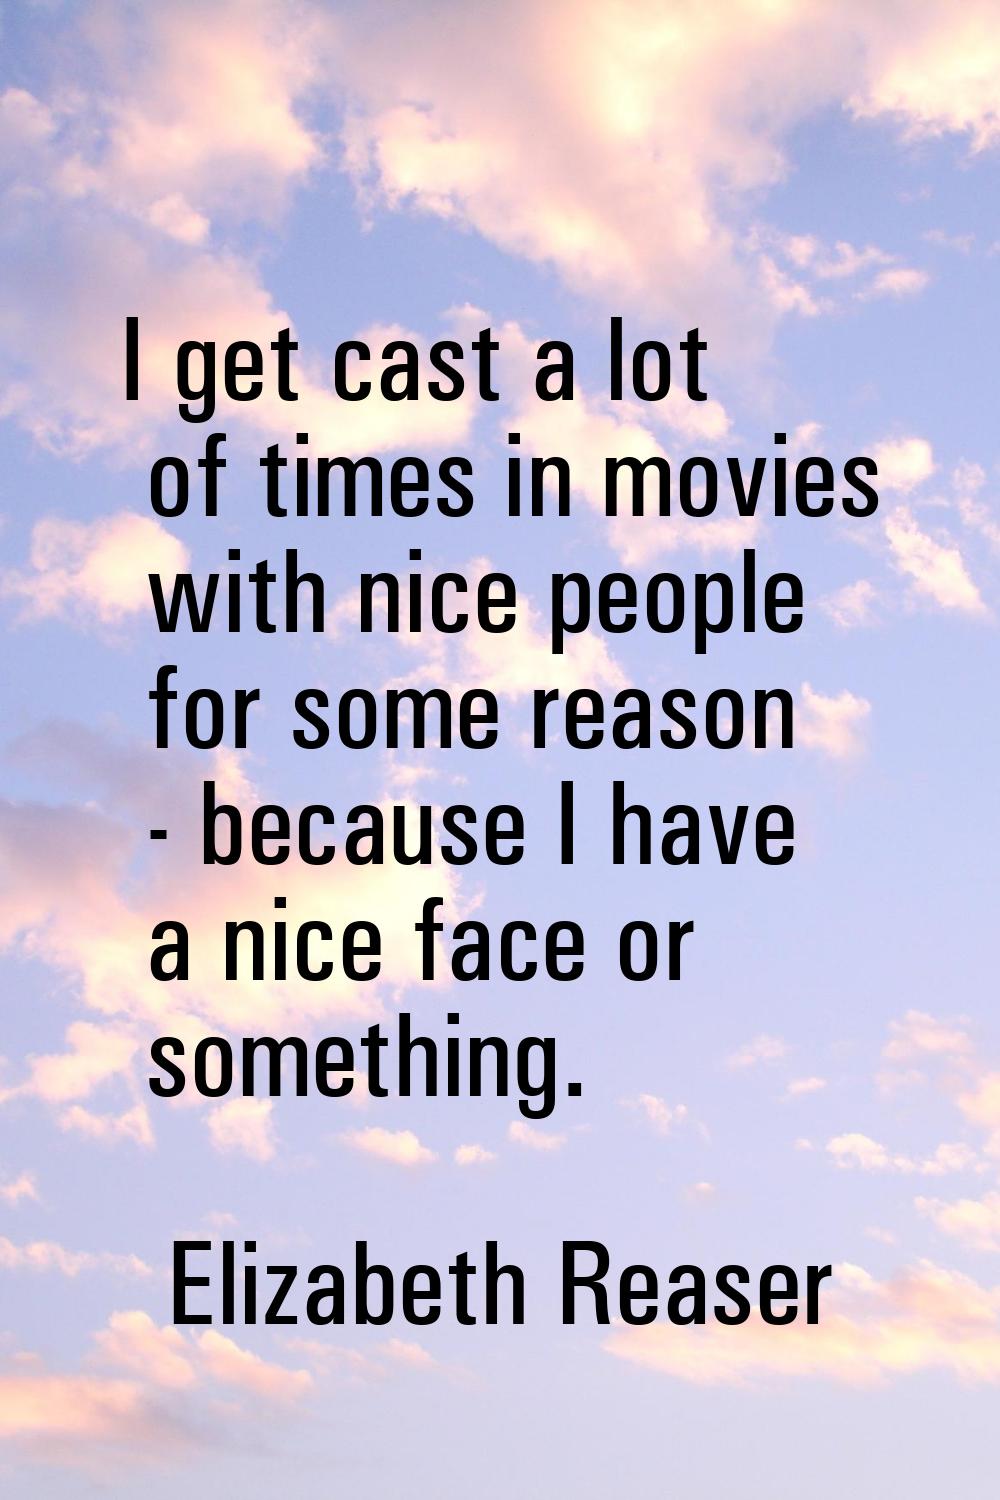 I get cast a lot of times in movies with nice people for some reason - because I have a nice face o